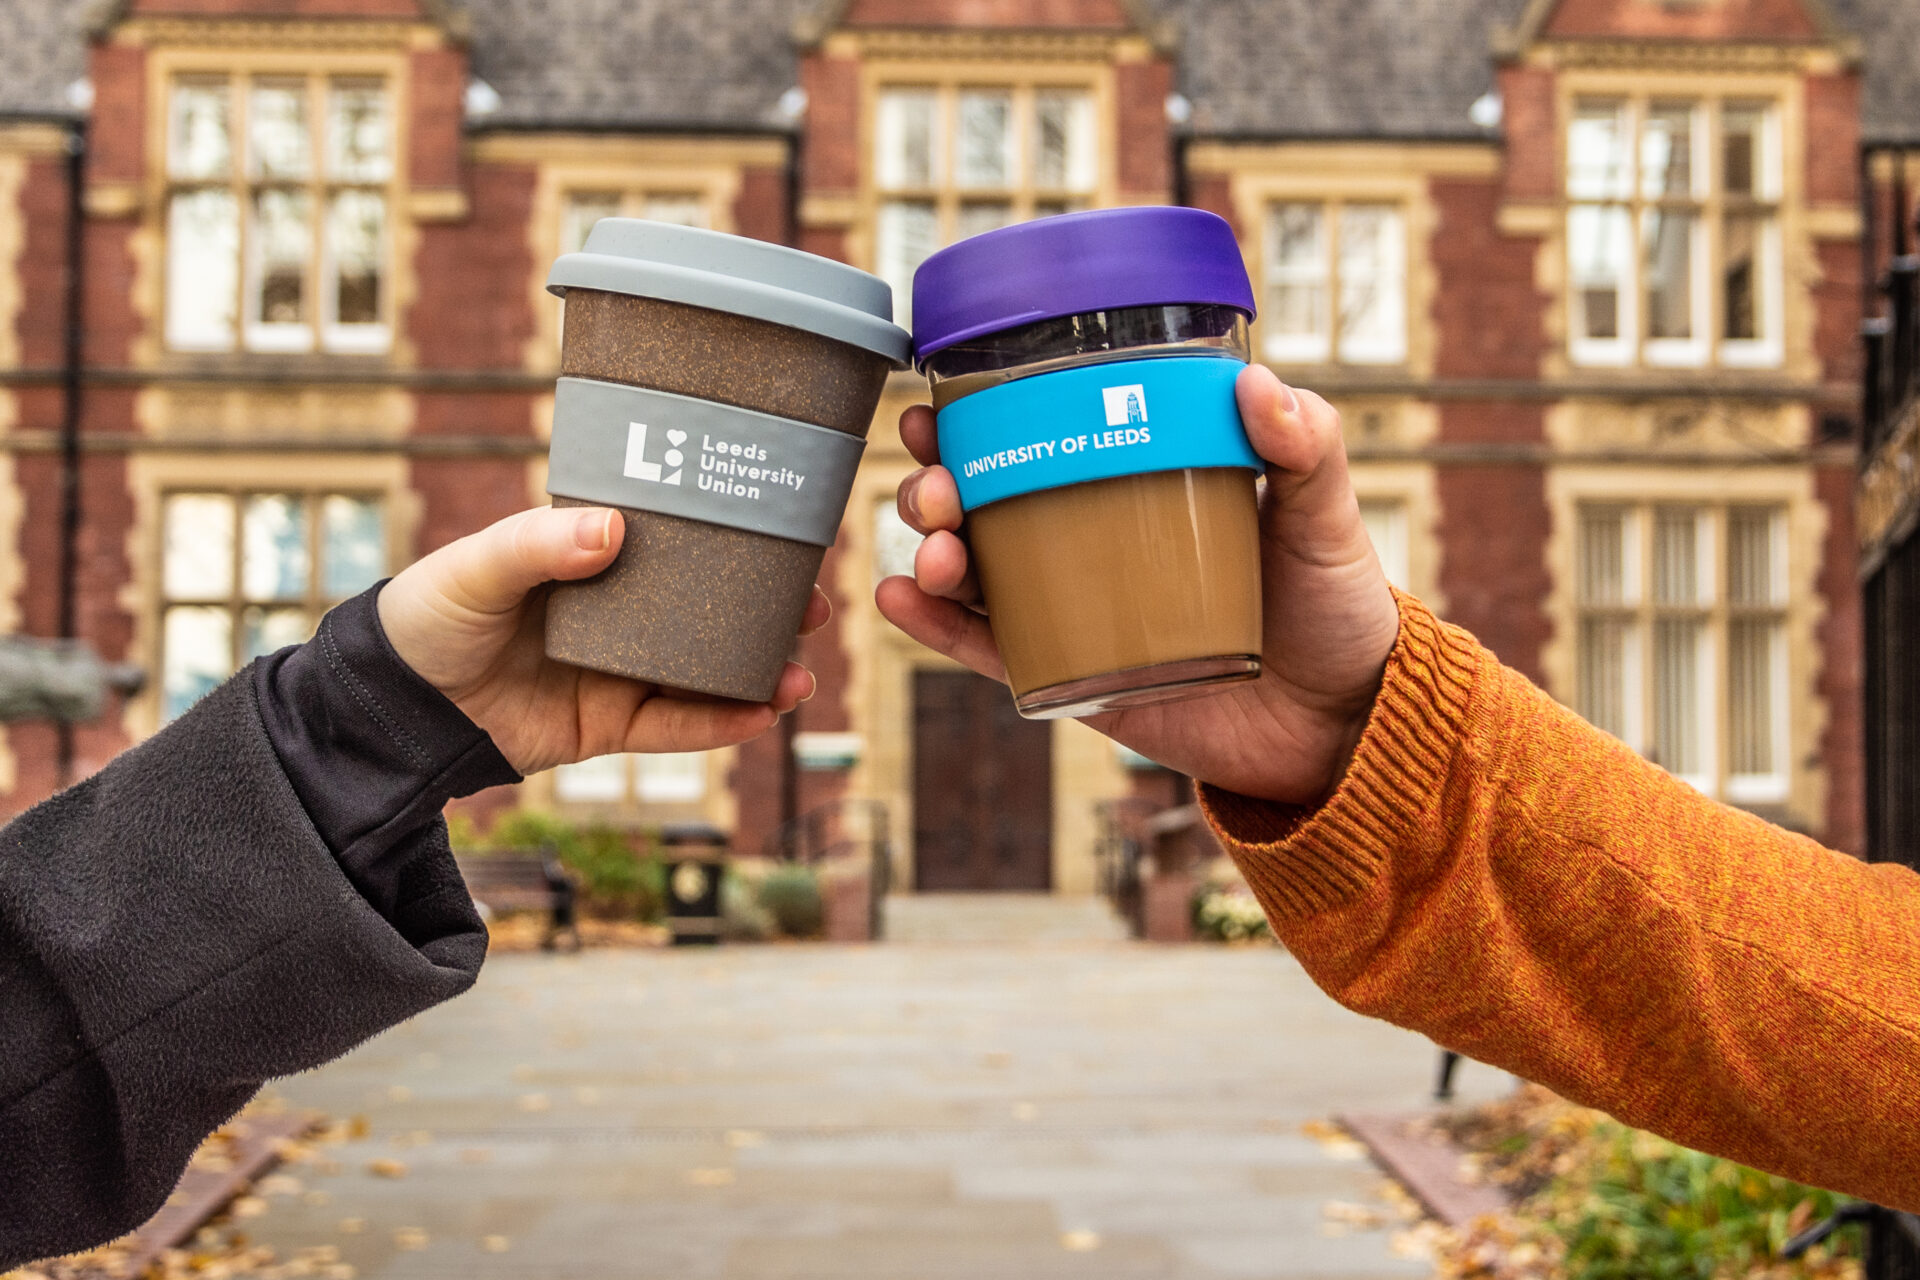 Two university, reusable 'keep cups' being held up